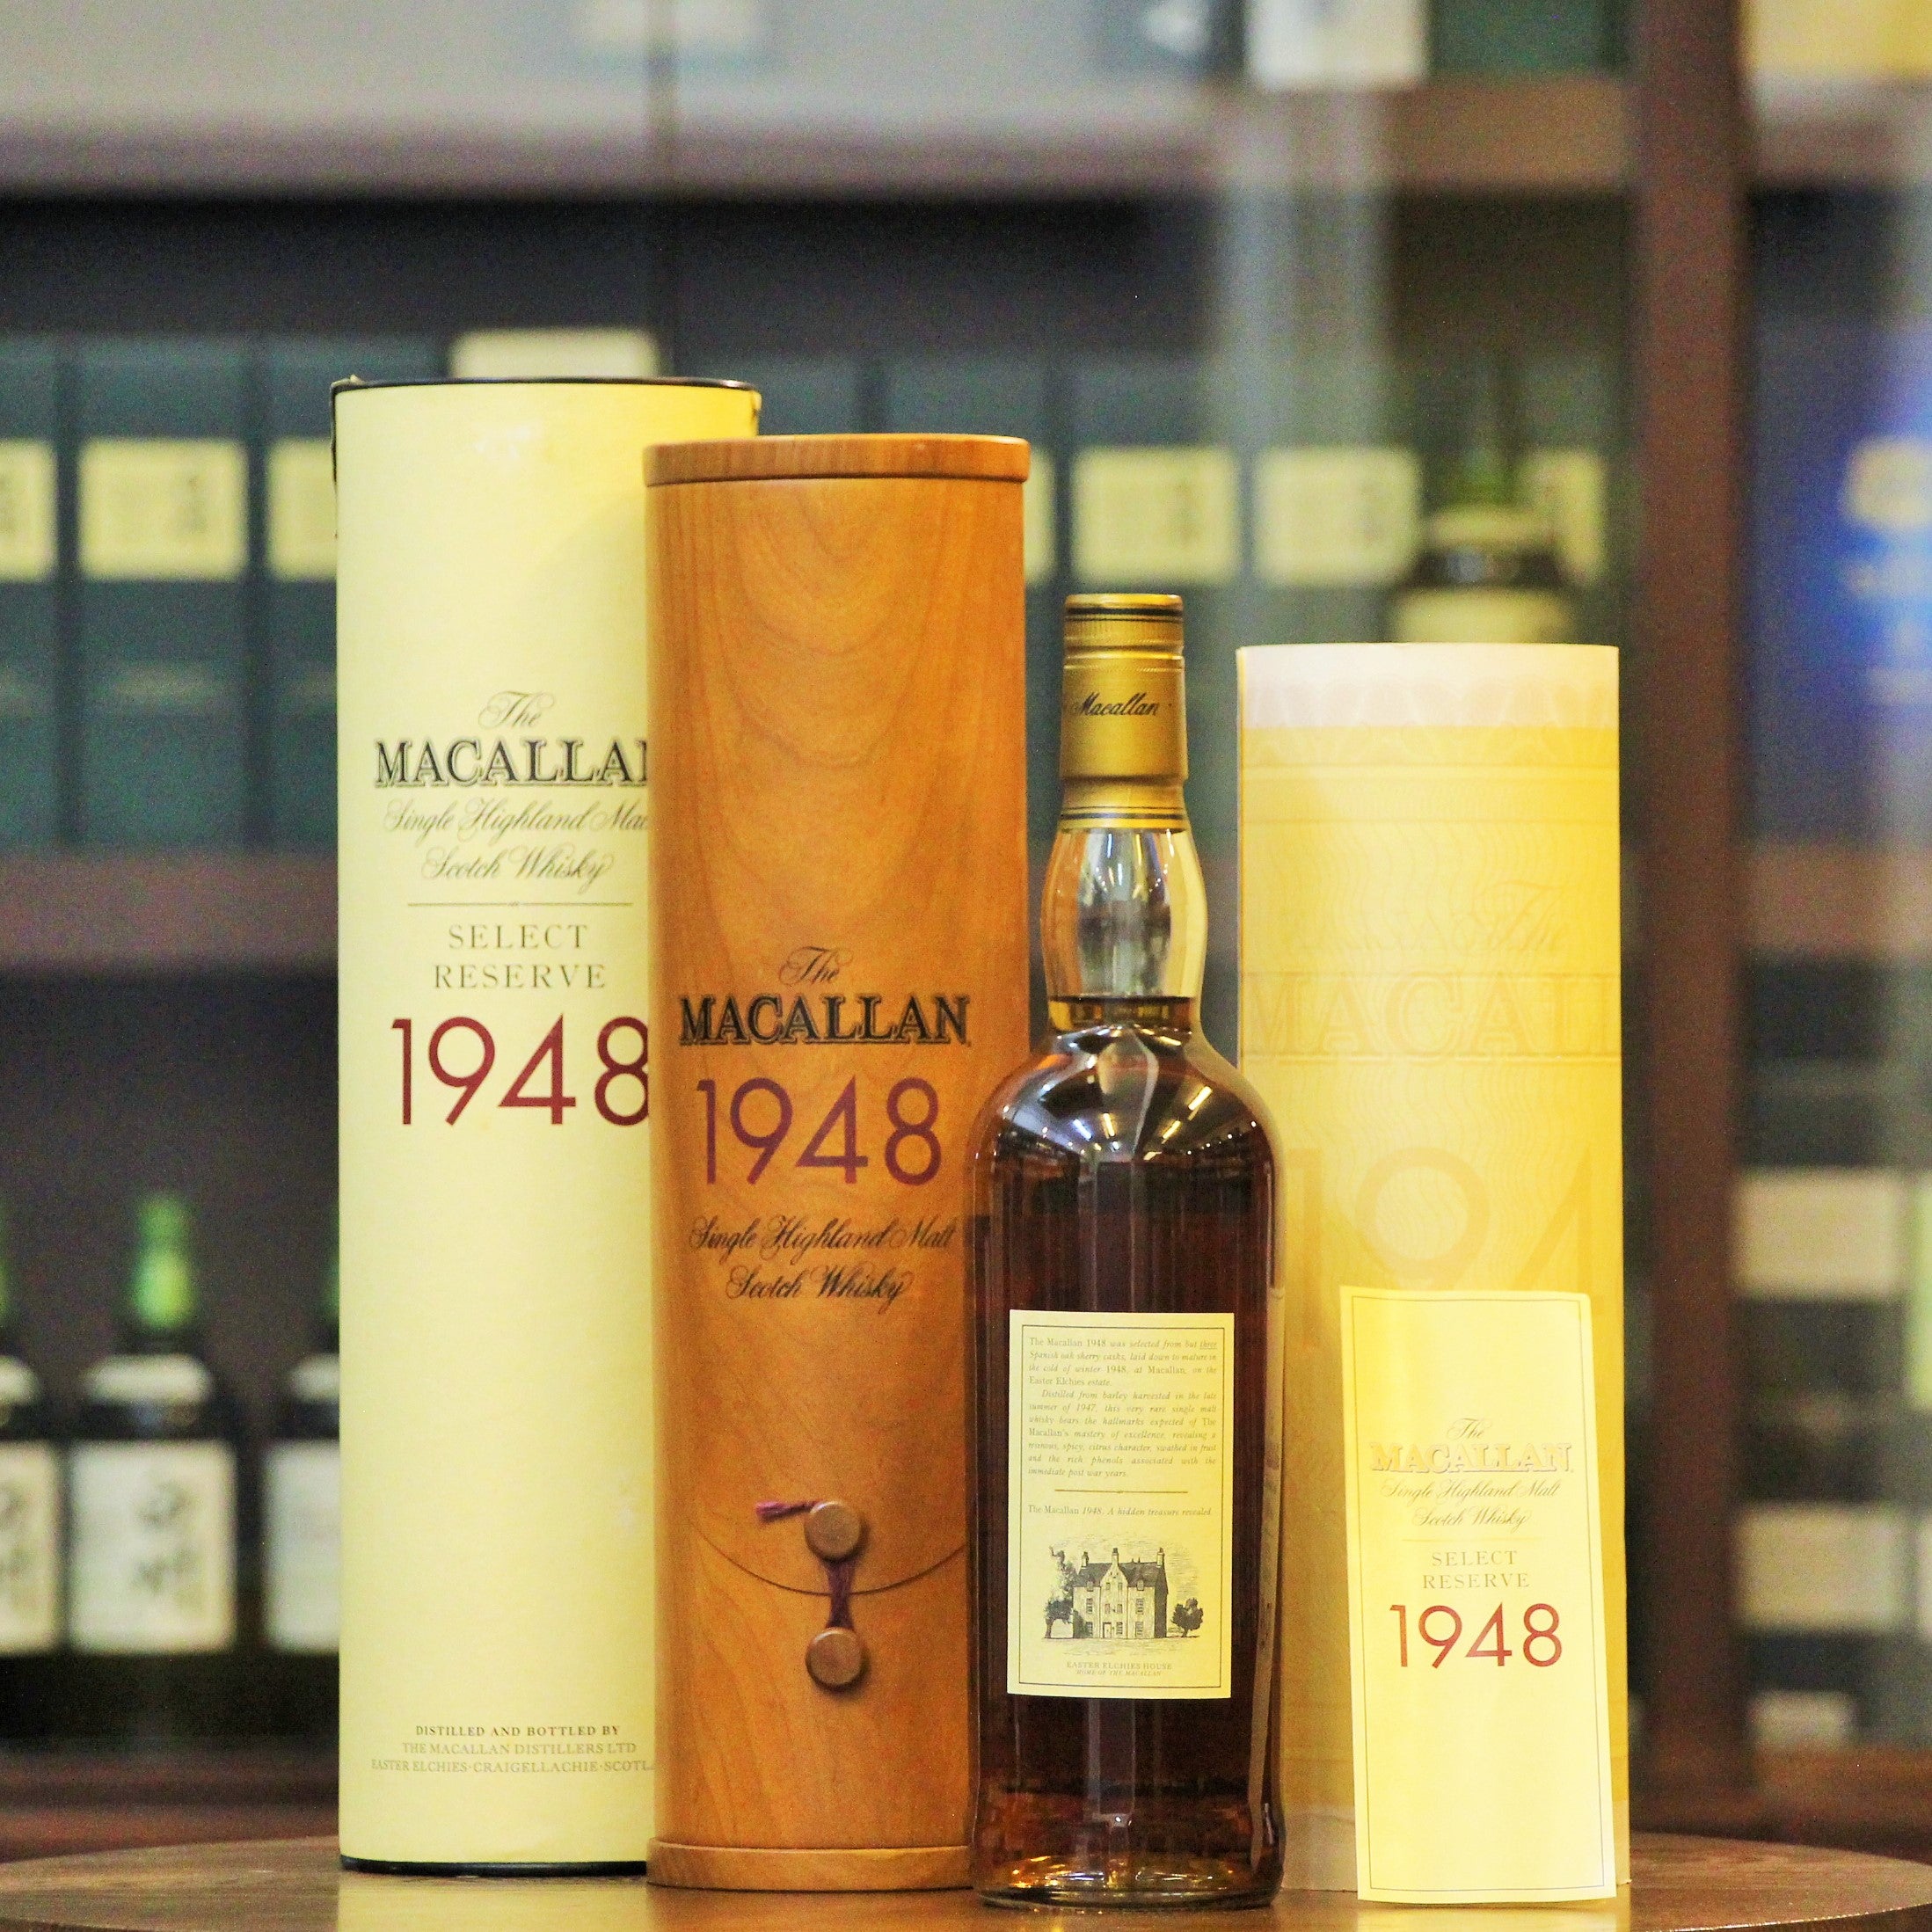 Distilled in 1948 from barley harvested in the late summer of 1947 (mashed and fermented in the last hours of 1947), this release was matured in three Spanish Oak Sherry Casks in the Easter Elchies Estate at Macallan. 366 bottles were released. Each bottle represents a day (and is hand numbered as such with a specific day from the year of 1948, which being a leap year had 366 days). 